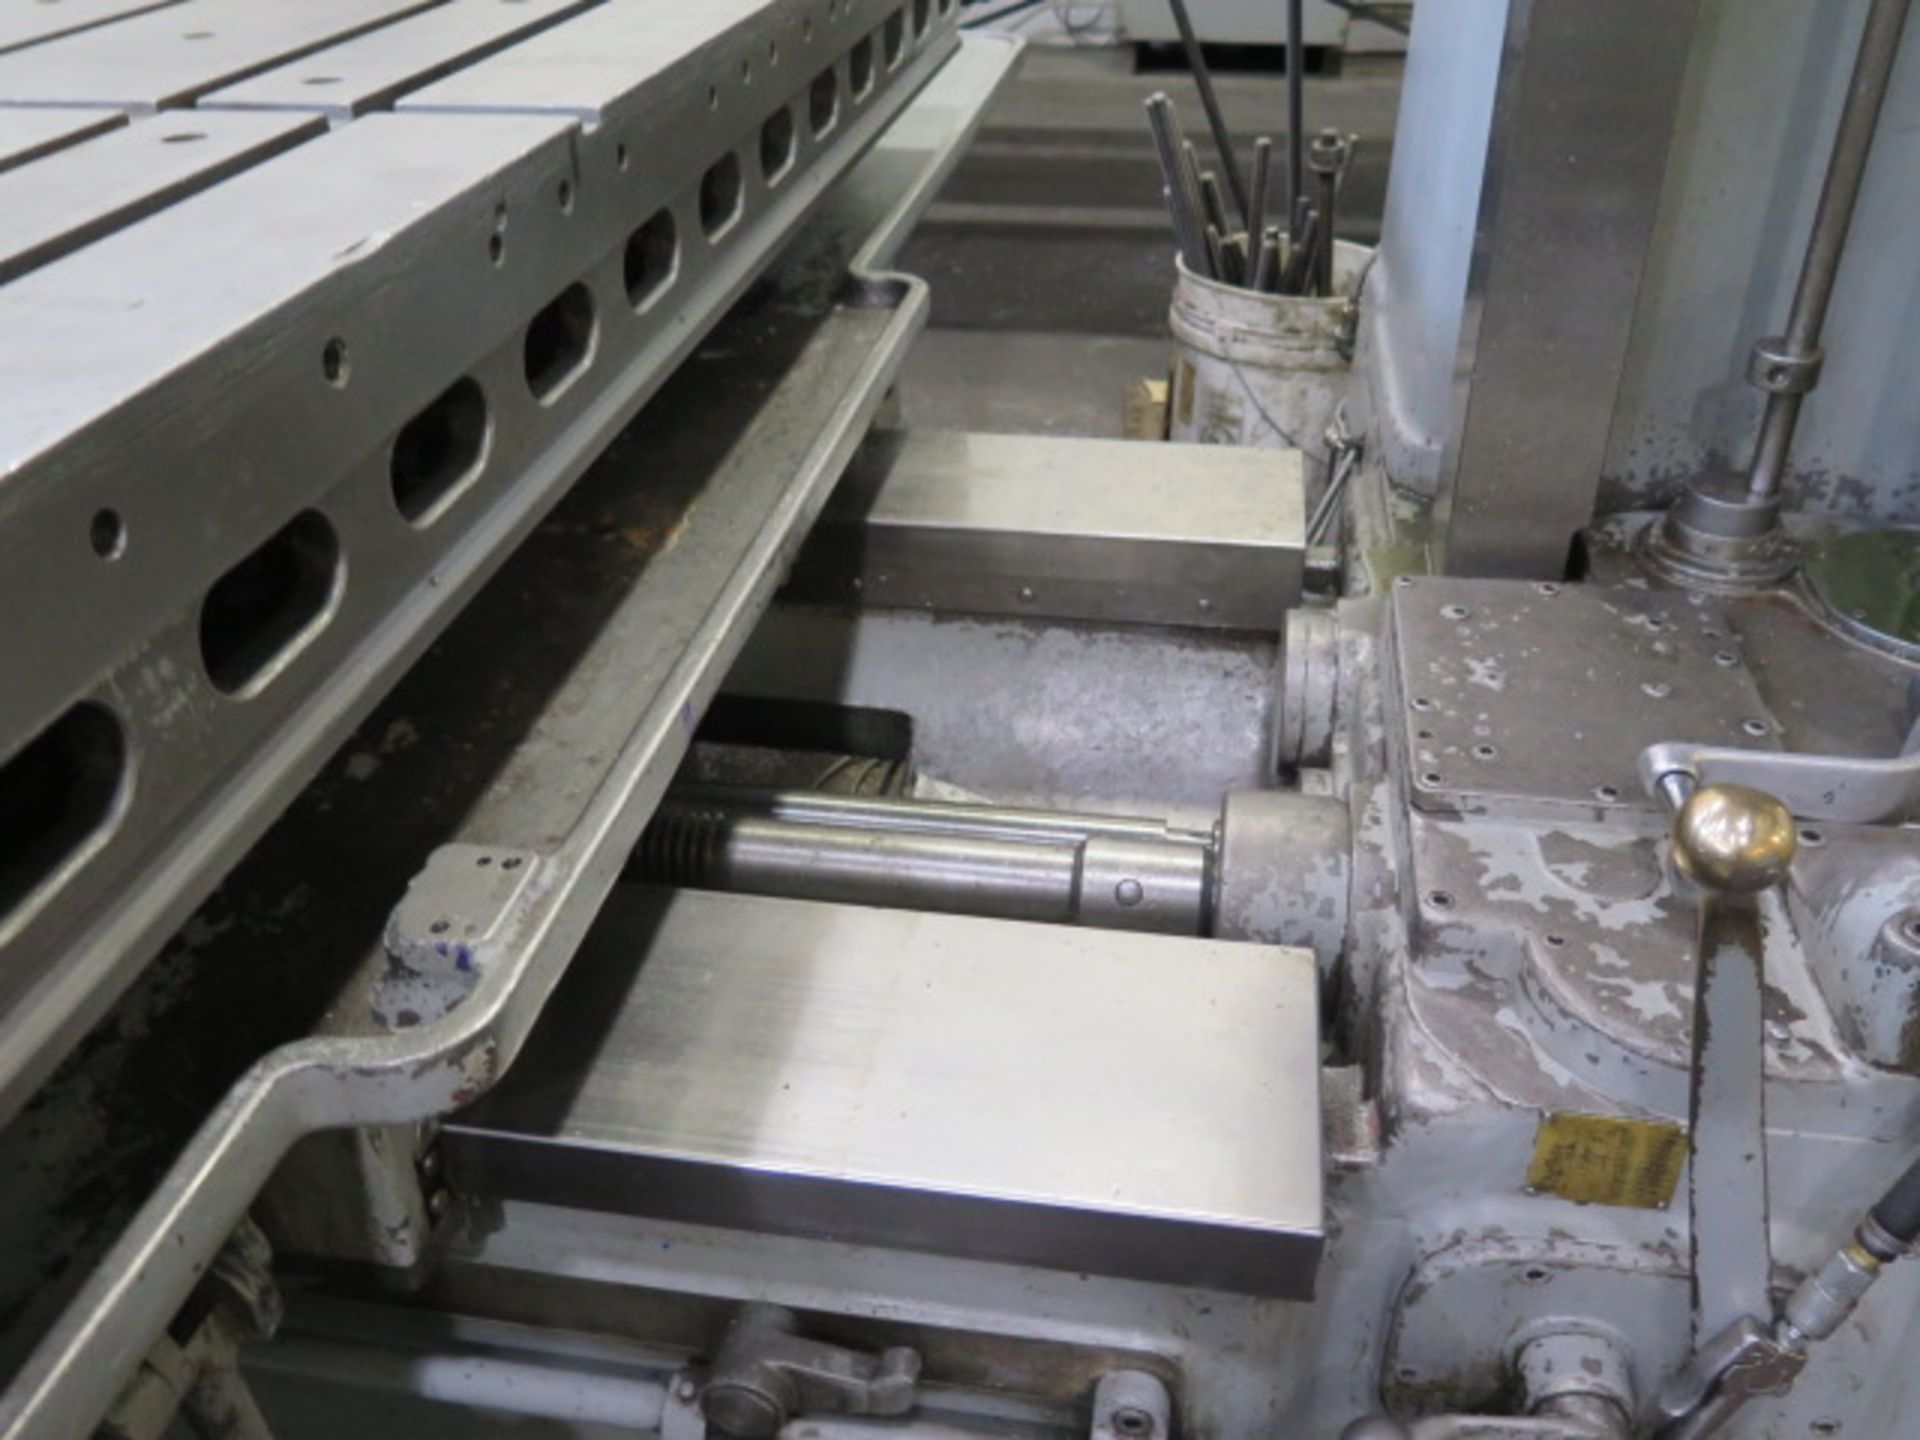 Giddings & Lewis 340-T Horizontal Boring Mill w/ Acu-Rite 4-Axis DRO, 4” Spindle, SOLD AS IS - Image 11 of 16